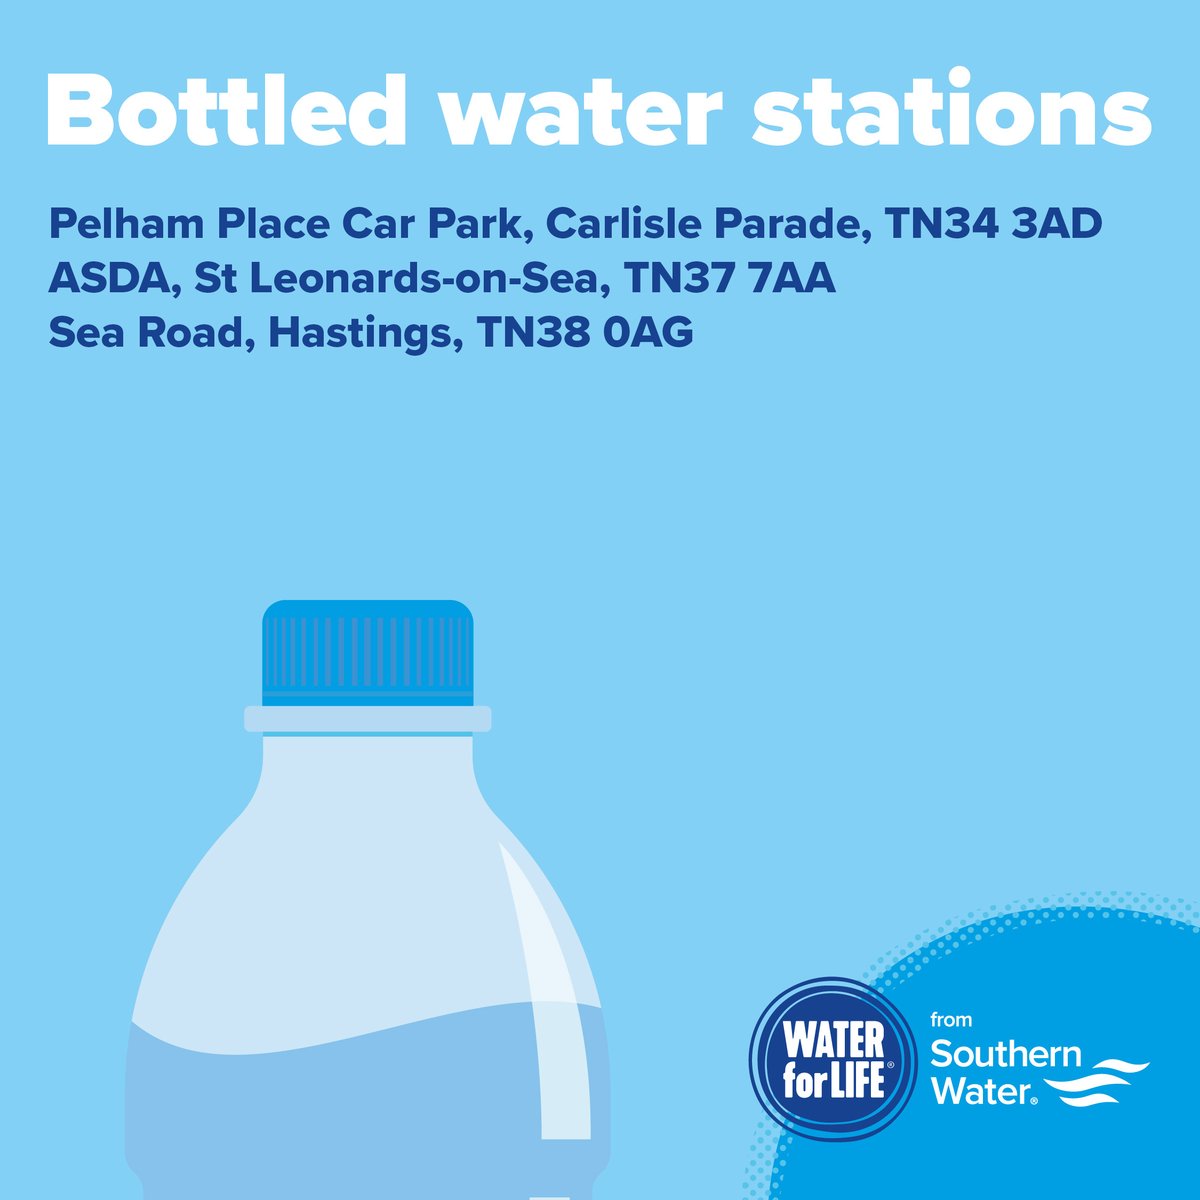 Update: We have now moved the station at Tesco, Church Wood Drive to Pelham Place Car Park, Carlisle Parade, TN34 3AD. Please do not travel to the Tesco location. An updated list of bottled water stations and their opening times can be found here: ow.ly/AtmK50RynrH